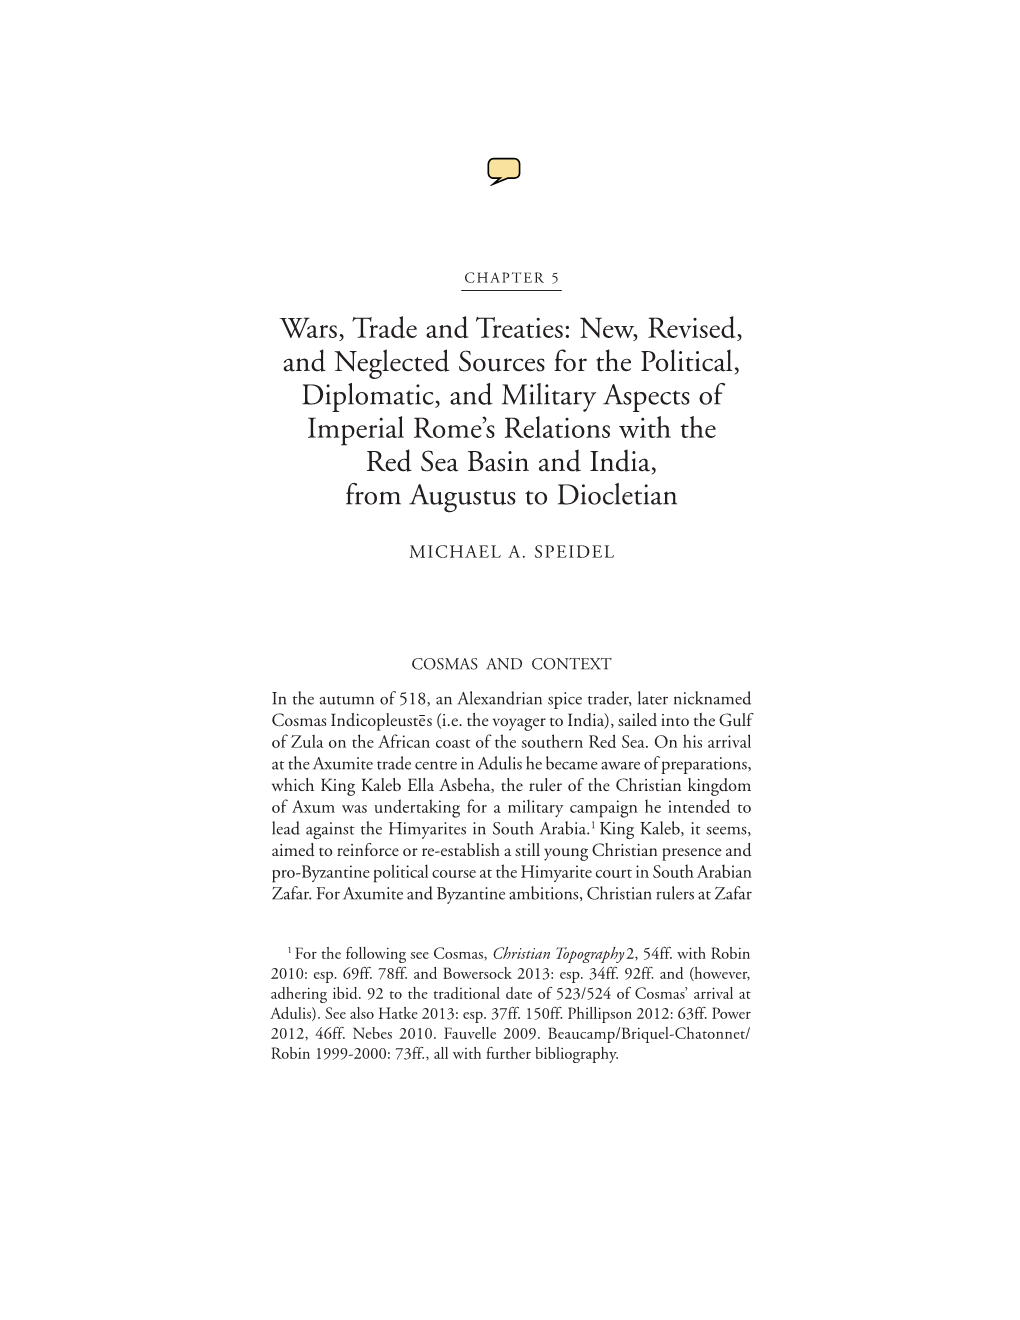 Wars, Trade and Treaties: New, Revised, and Neglected Sources for the Political, Diplomatic, and Military Aspects of Imperial Ro